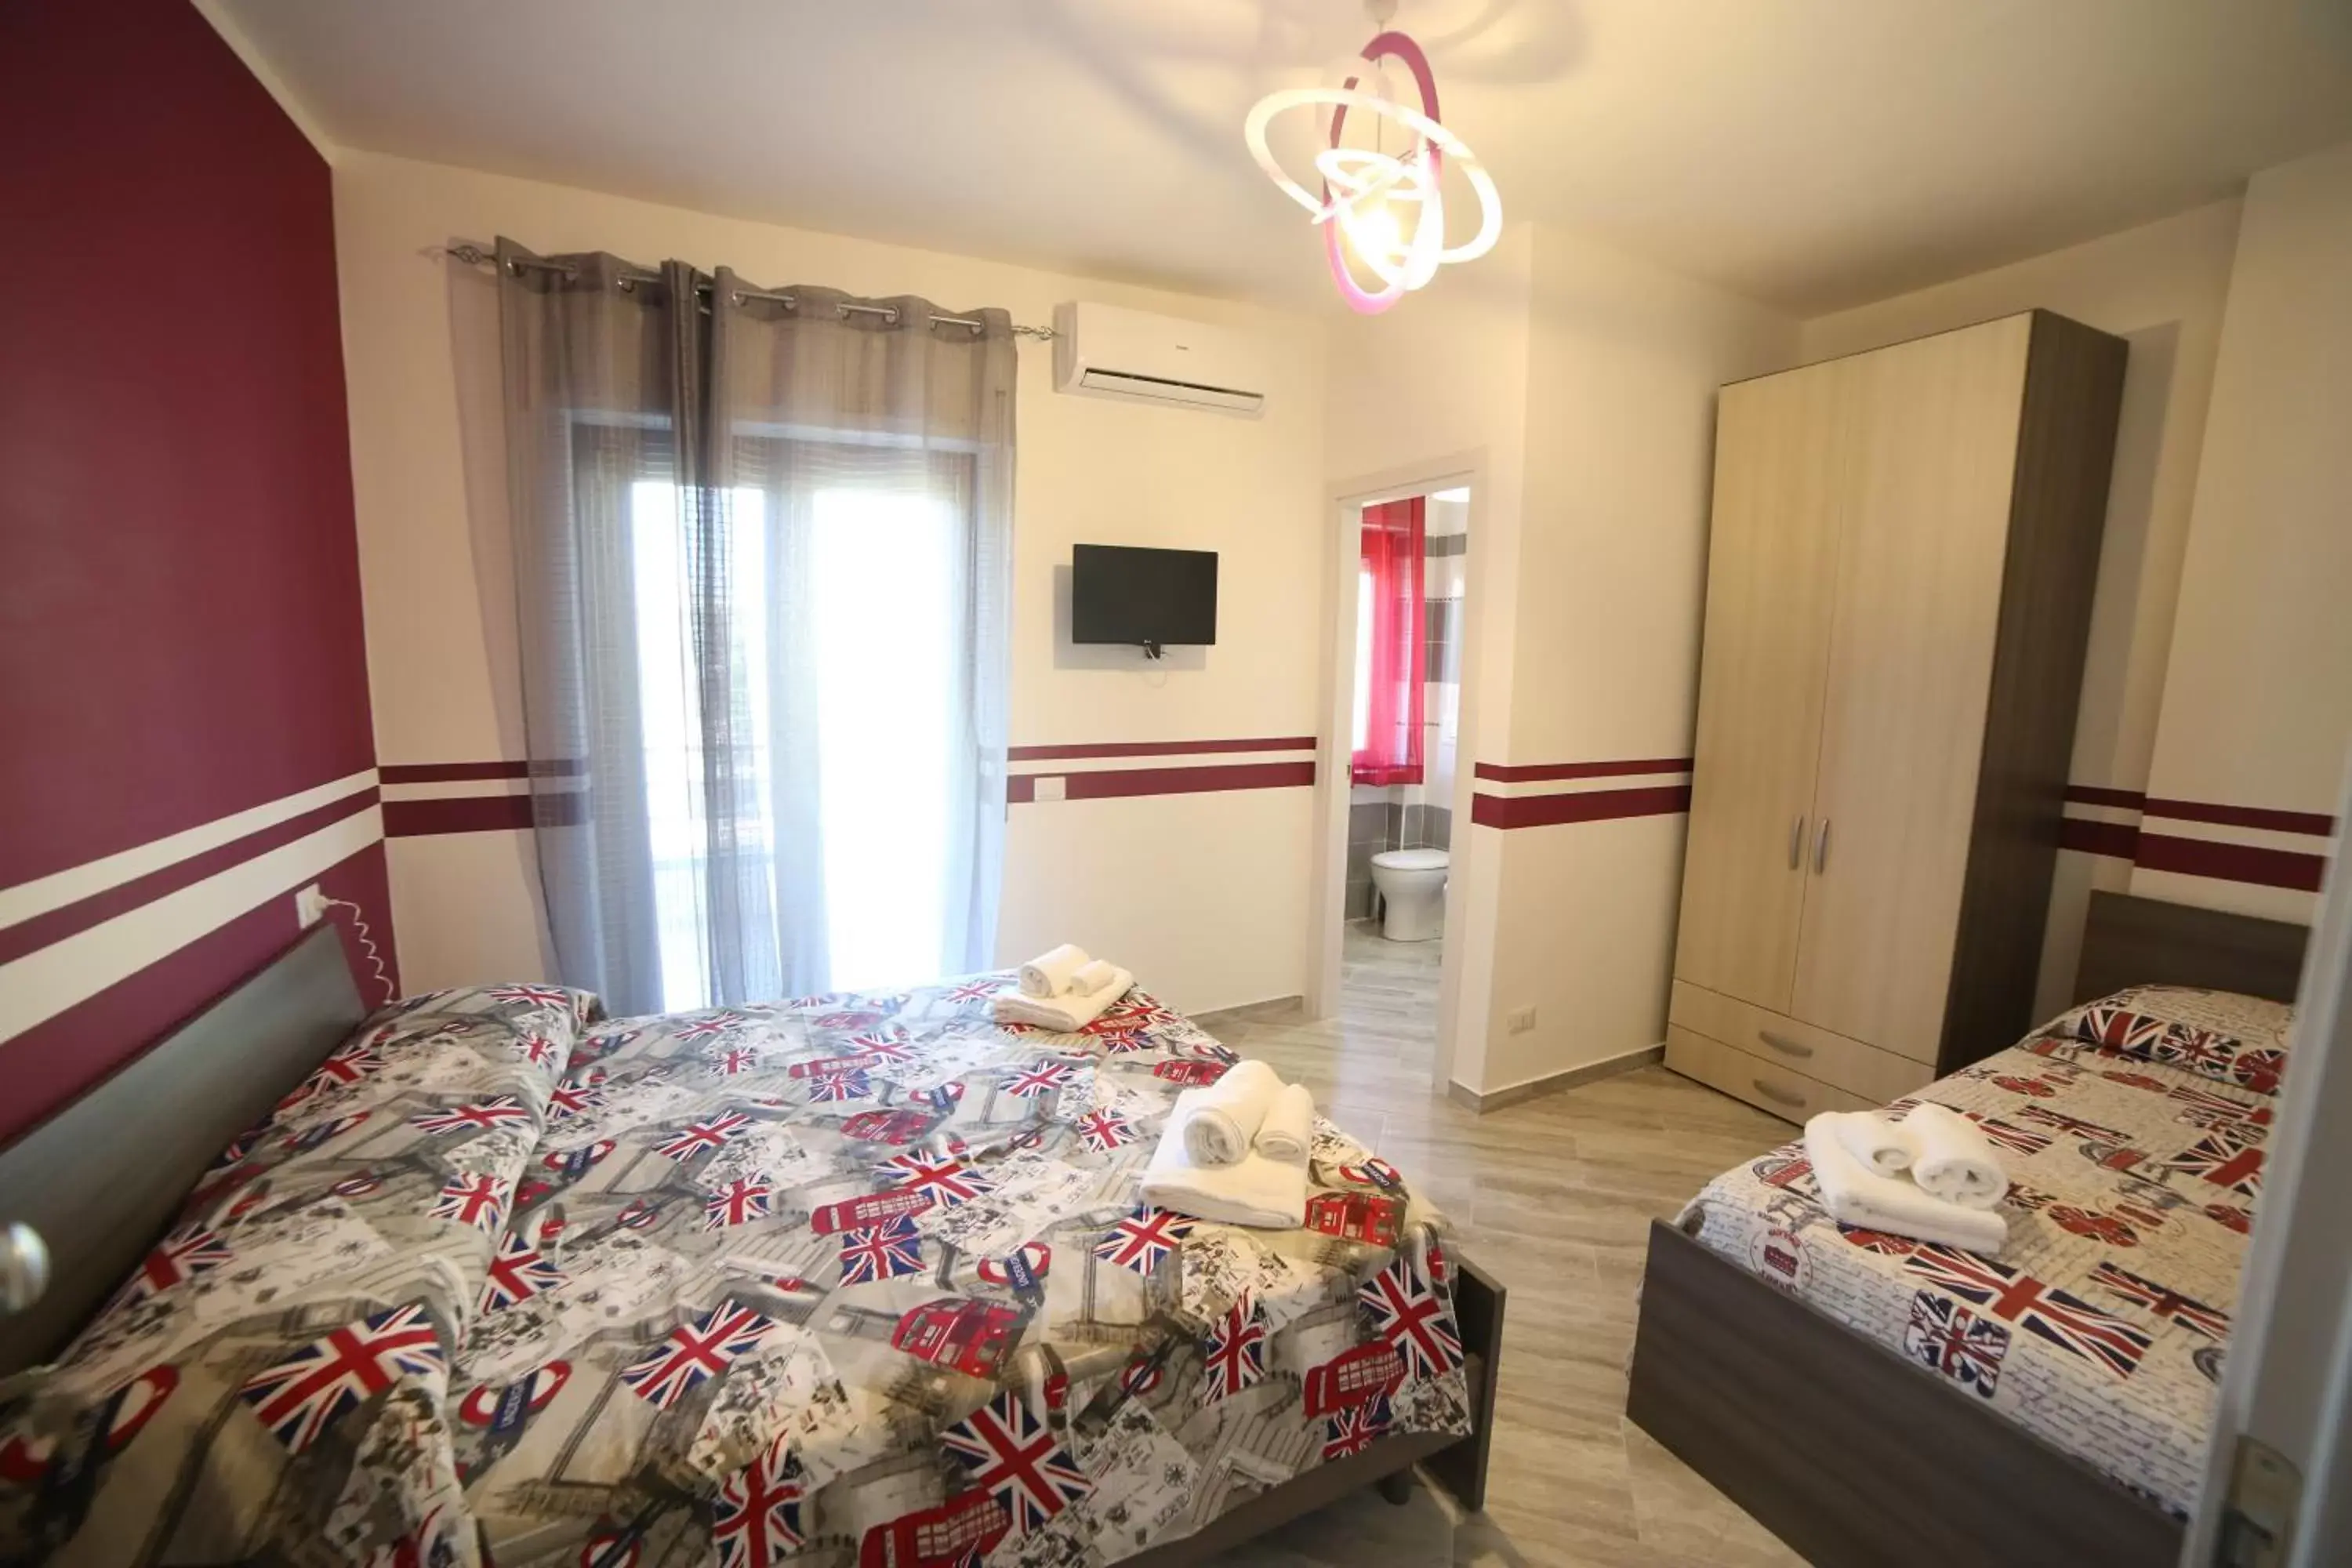 Bed, Room Photo in Parco Carrara